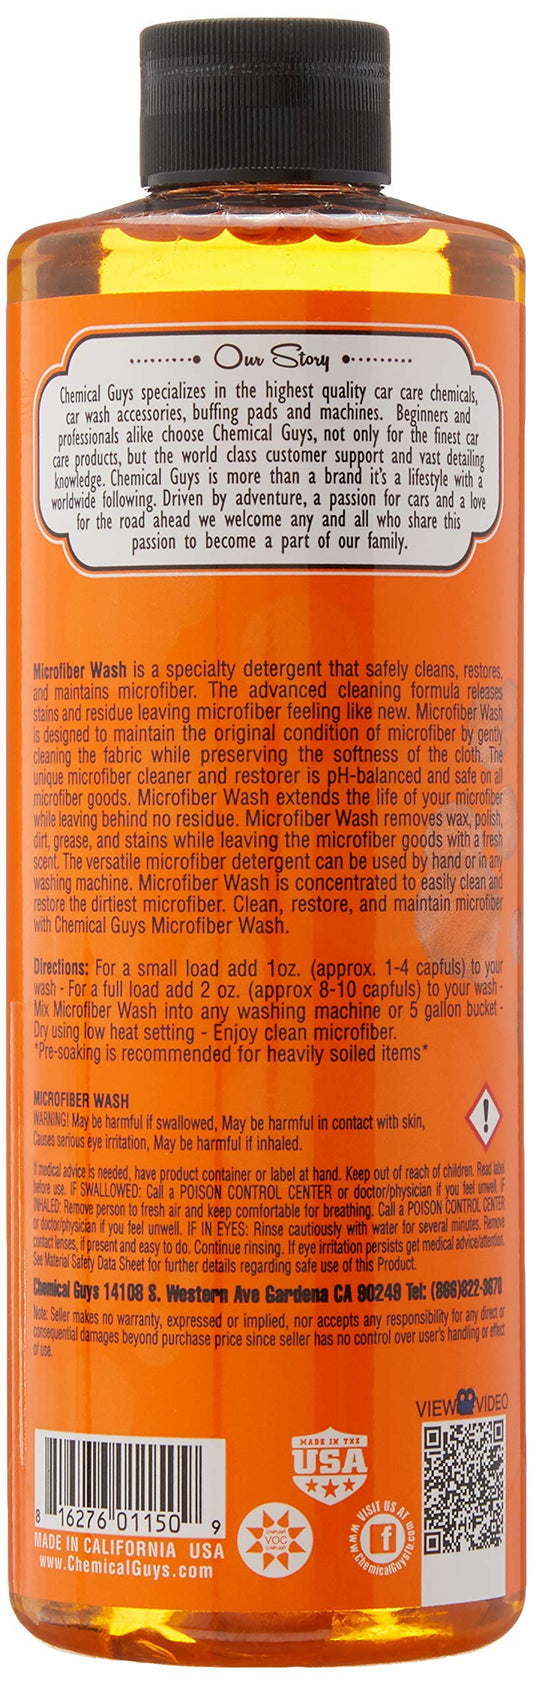 Chemical Guys CWS_201_16 Microfiber Cleaning Cloth & Car Wash Towel Concentrated Cleaning Detergent, 16 fl oz, Orange Scent